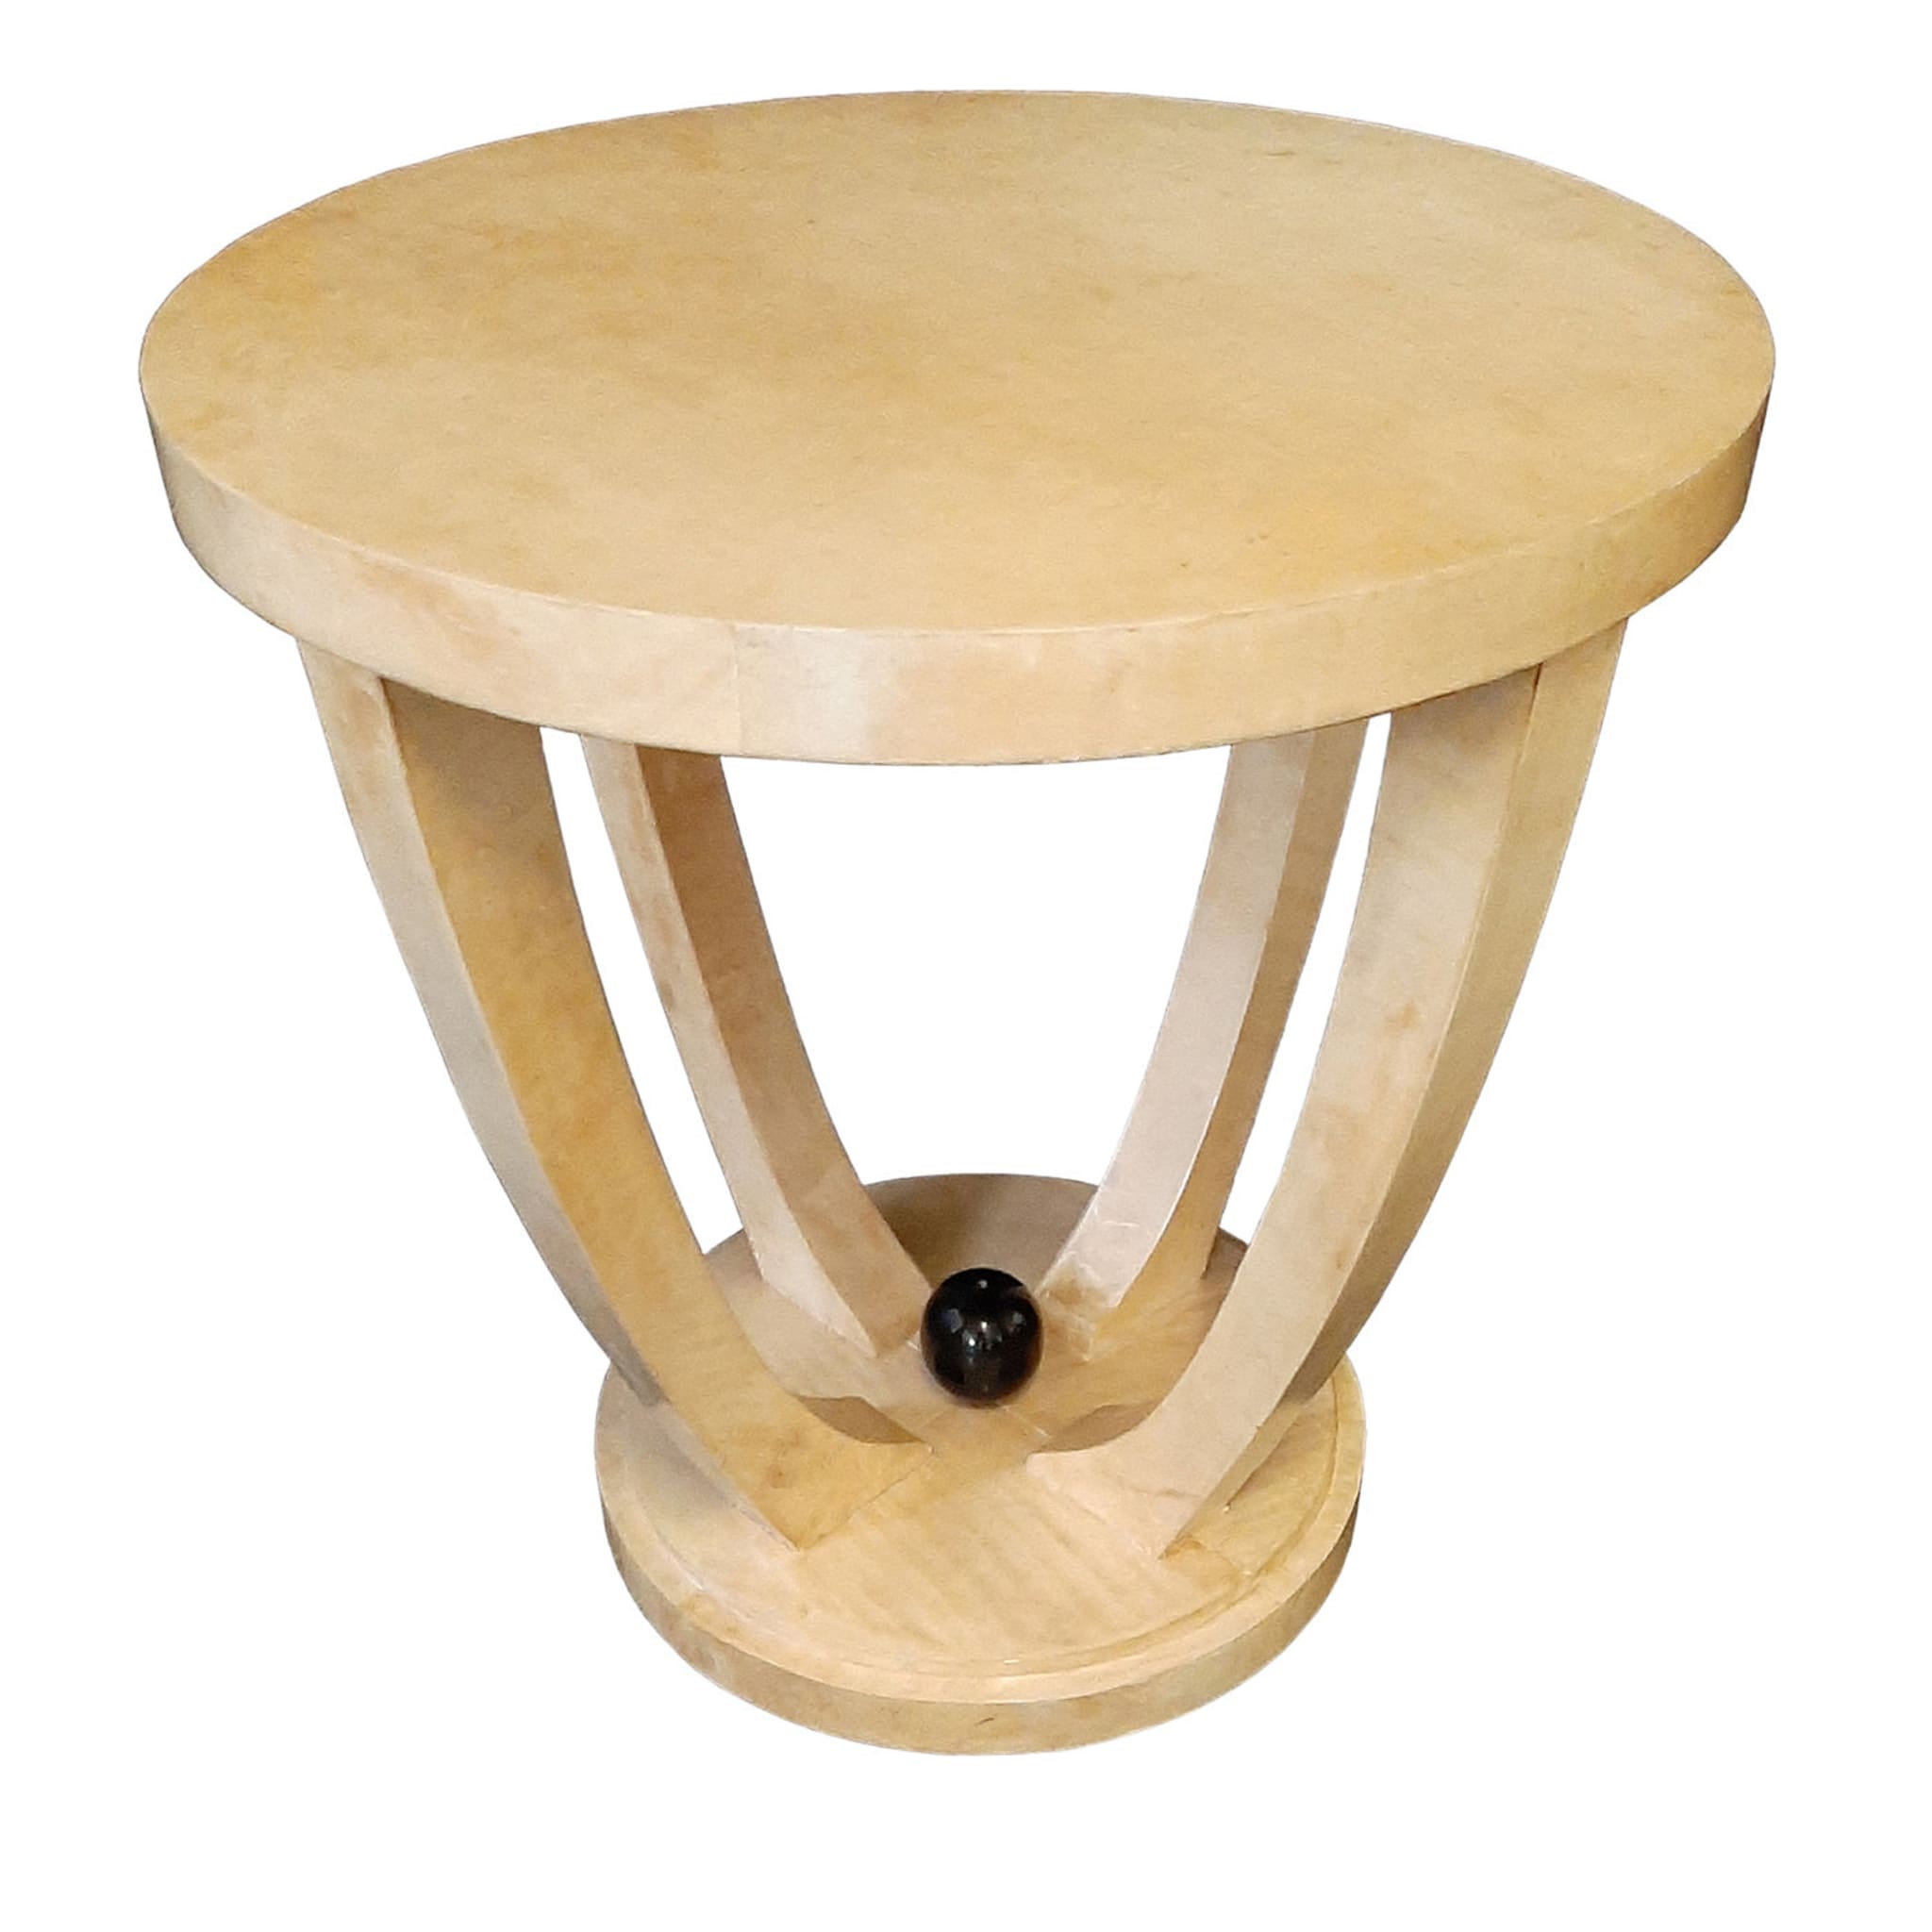 Ivory Parchment Round Side Table - Alternative view 1